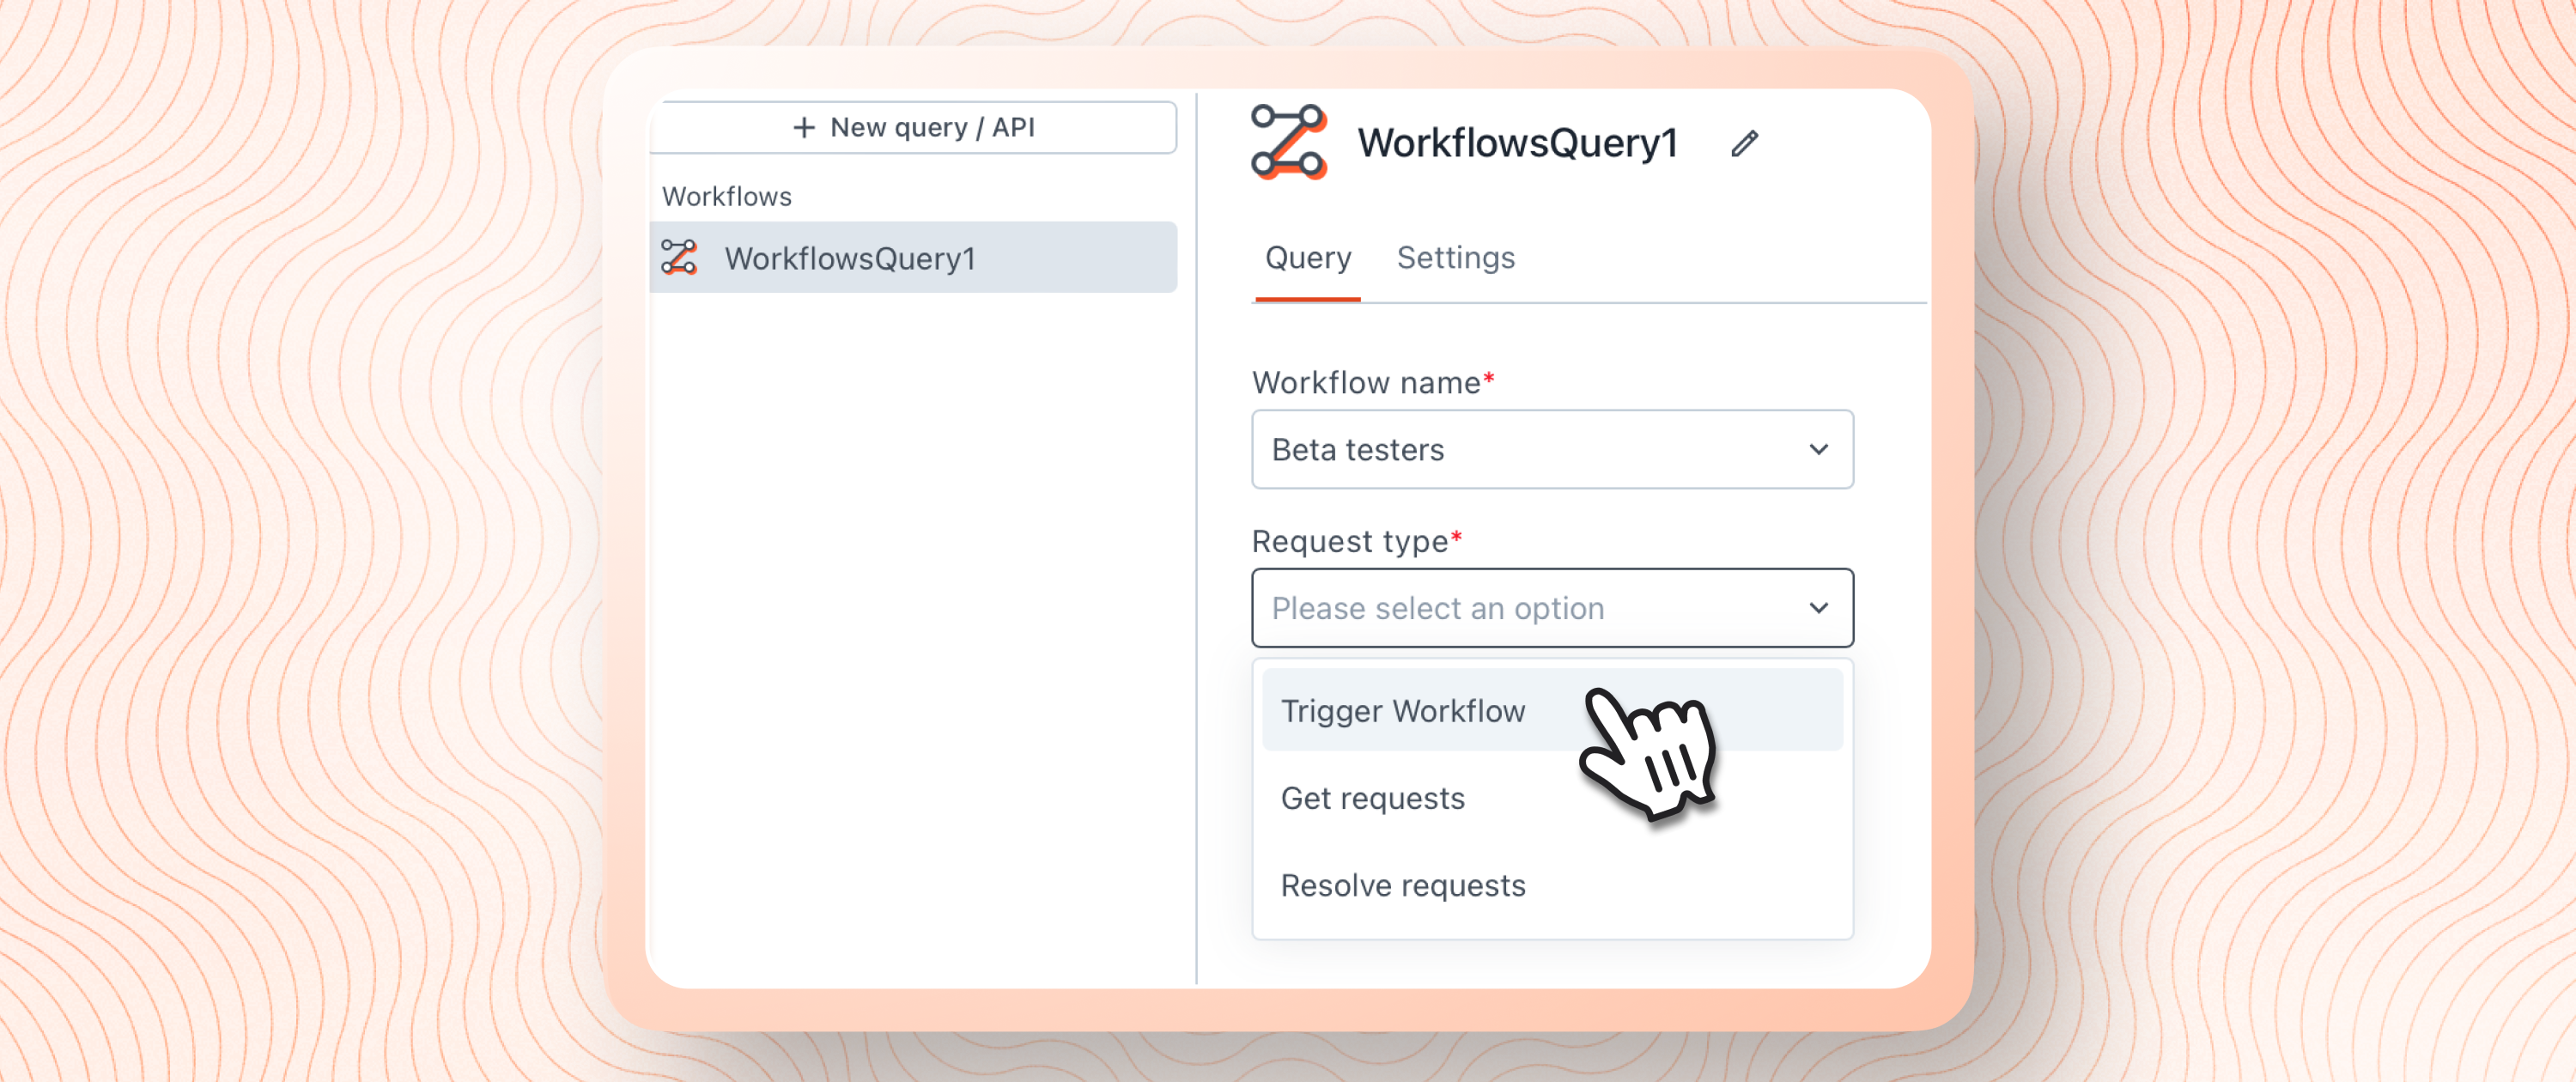 Introducing Workflows Beta: A Developer-Focused Approach to Automating Tasks for Your Business Apps